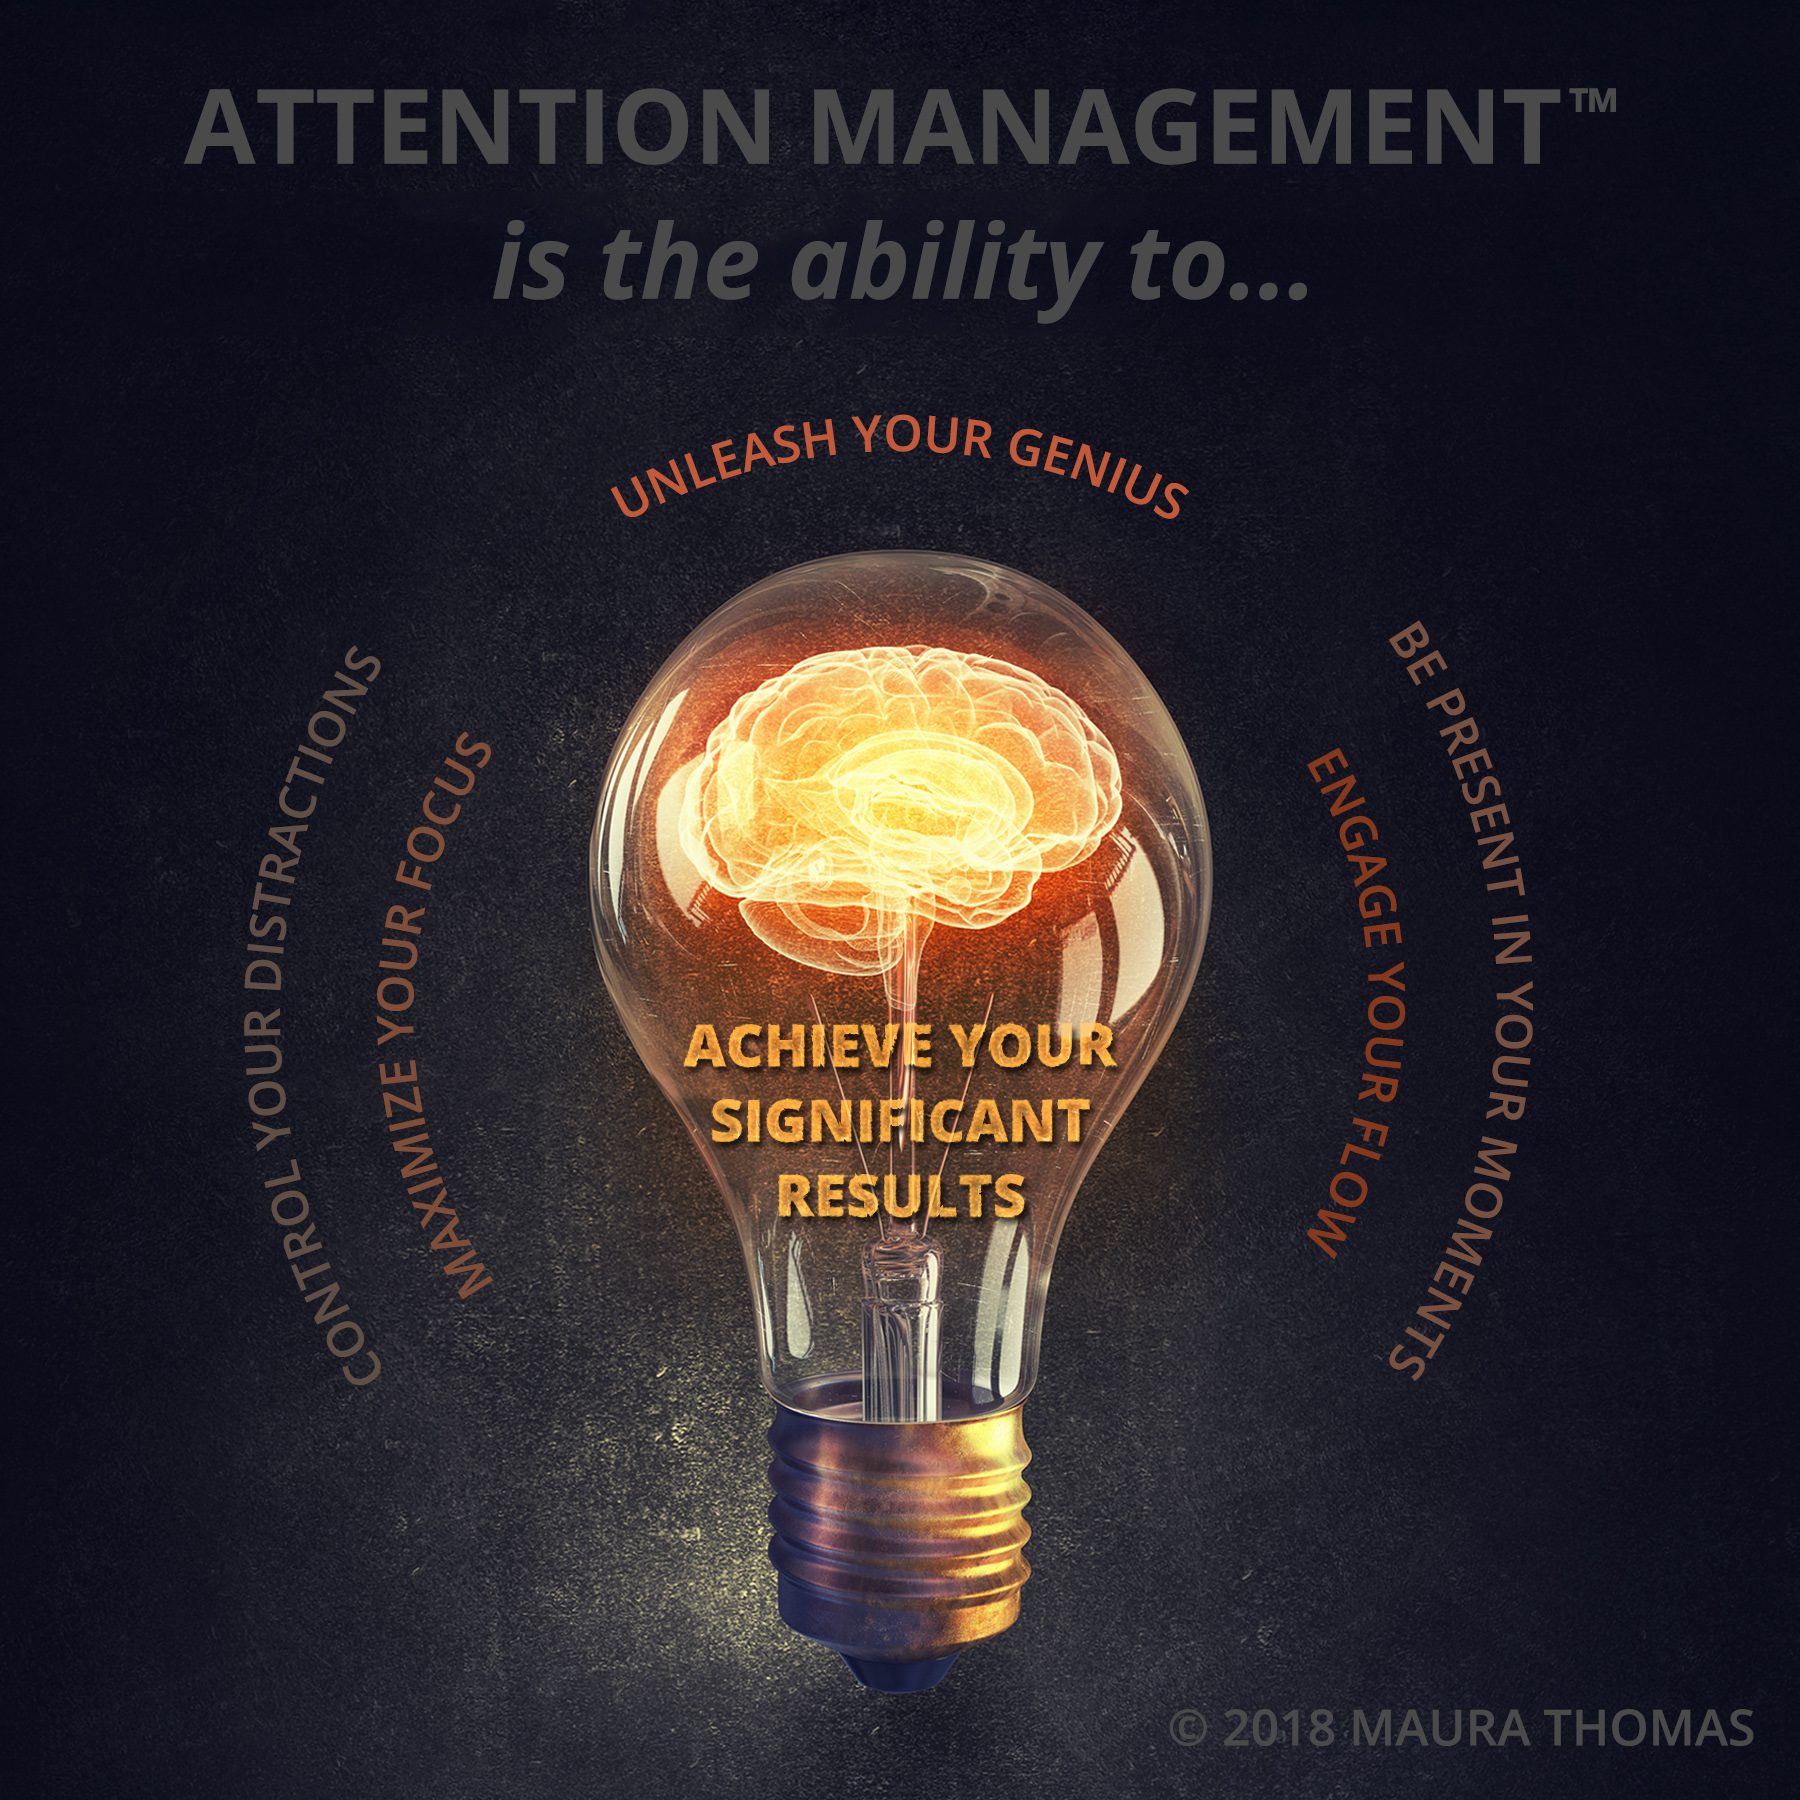 Attention management definition from Maura Thomas